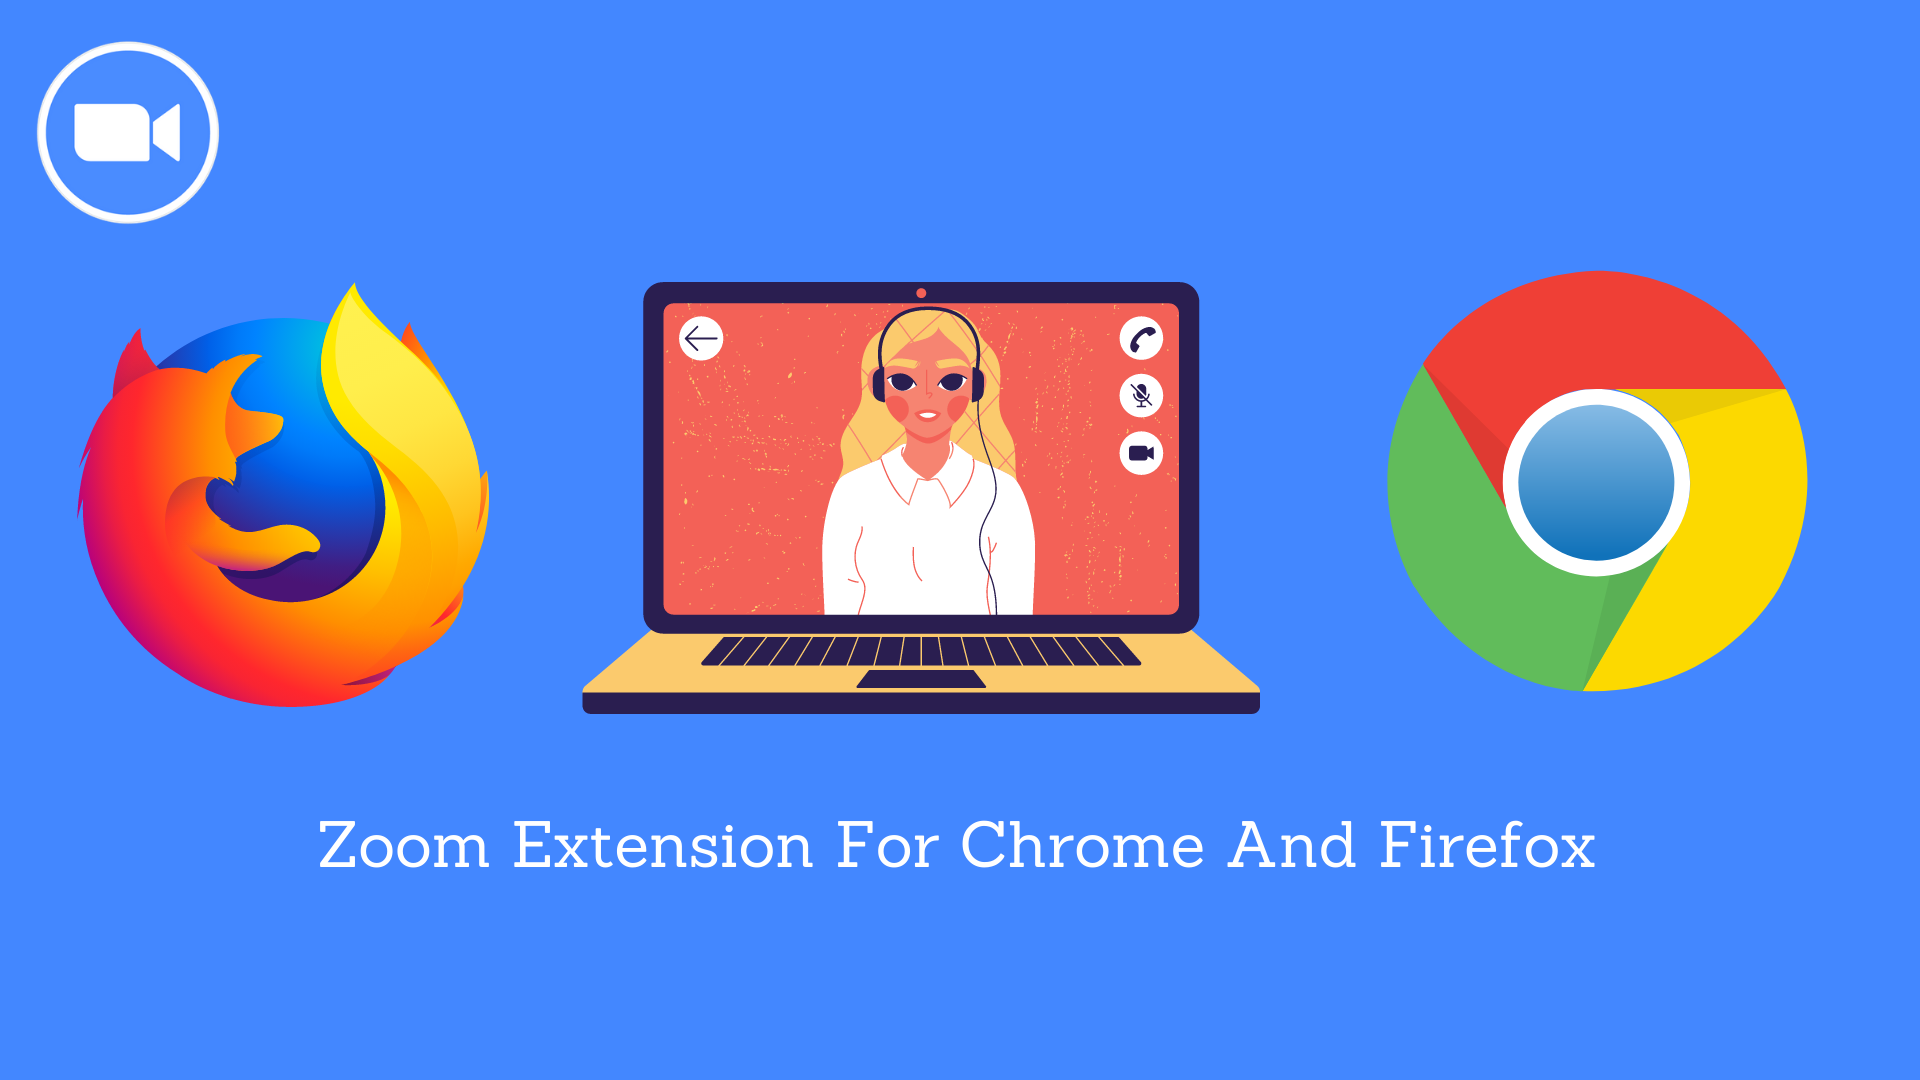 Zoom Extension For Chrome And Firefox - Download Messaging App